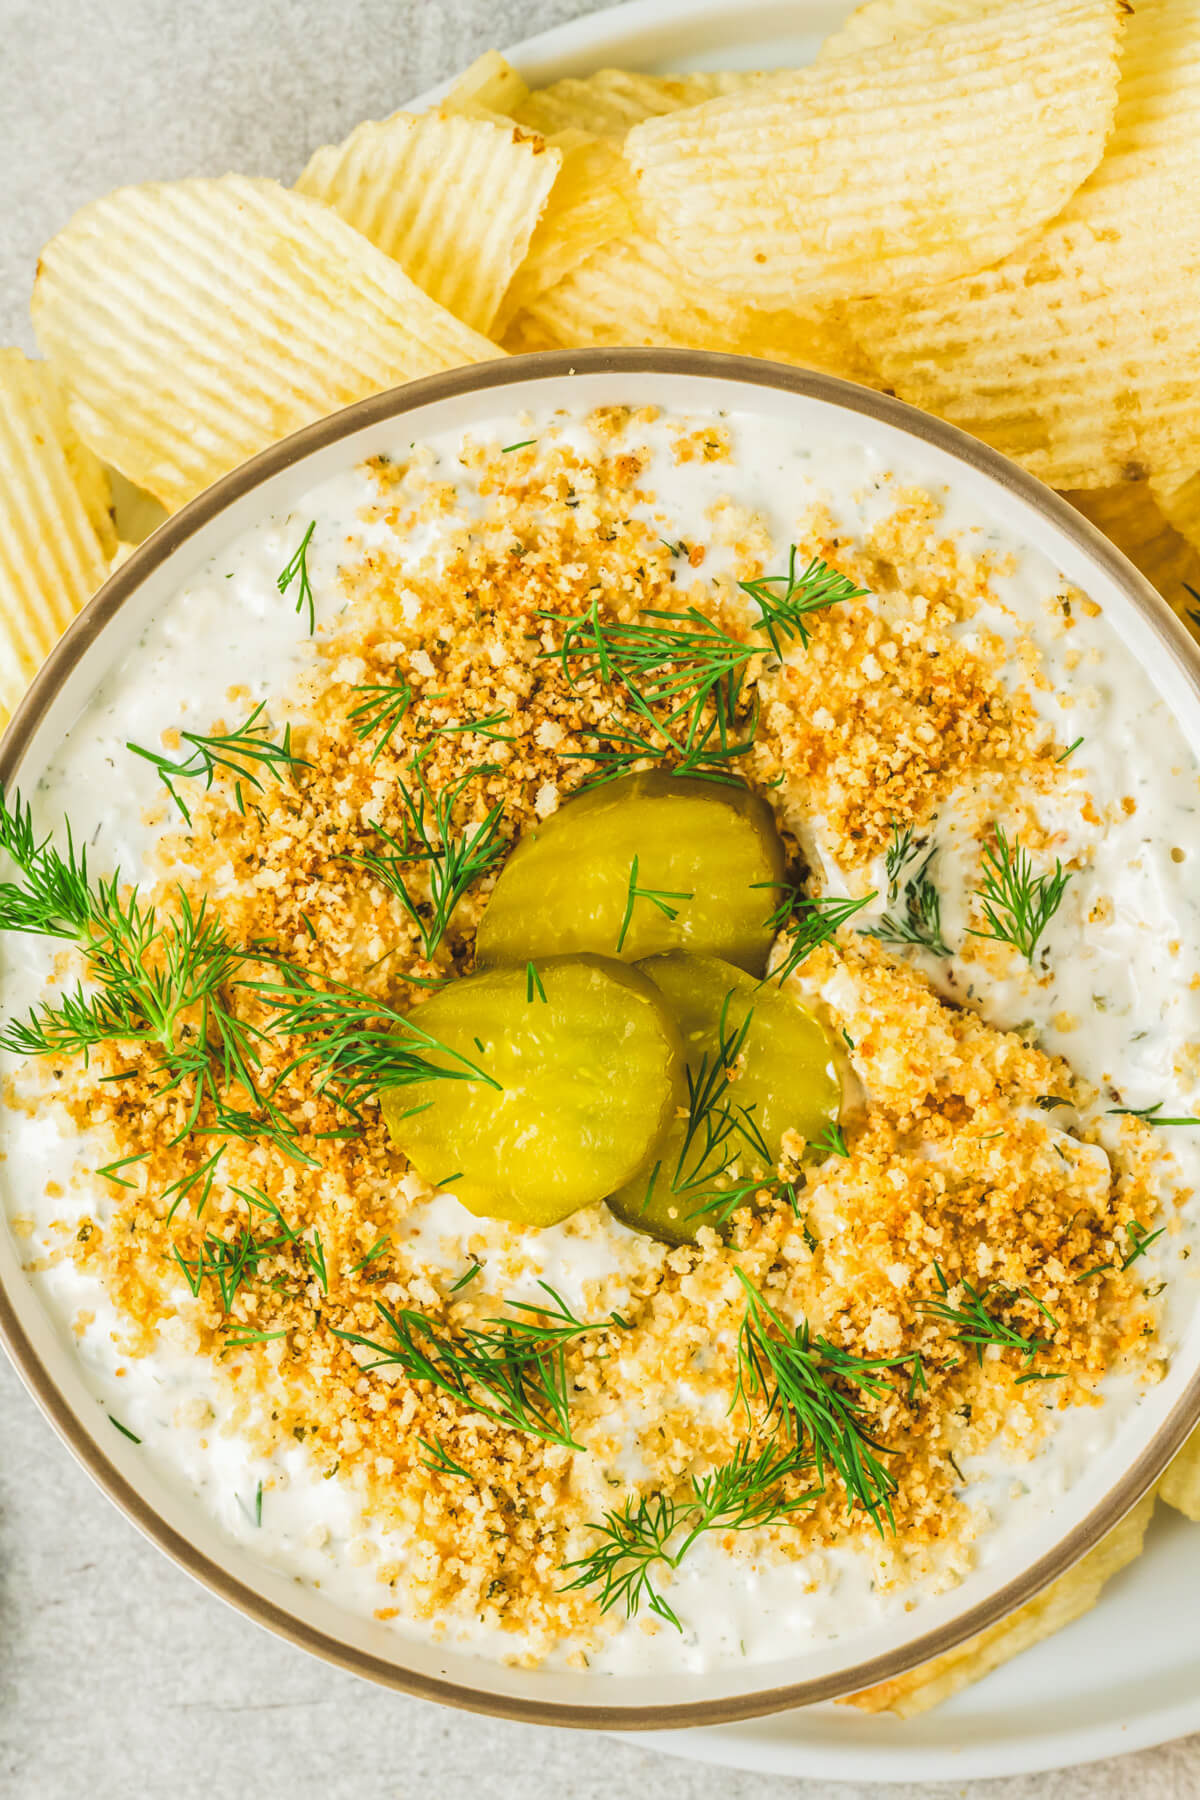 Ridged potato chips surround a bowl of white dill pickle dip topped with golden panko crumbs, fresh dill, and sliced dill pickles. 